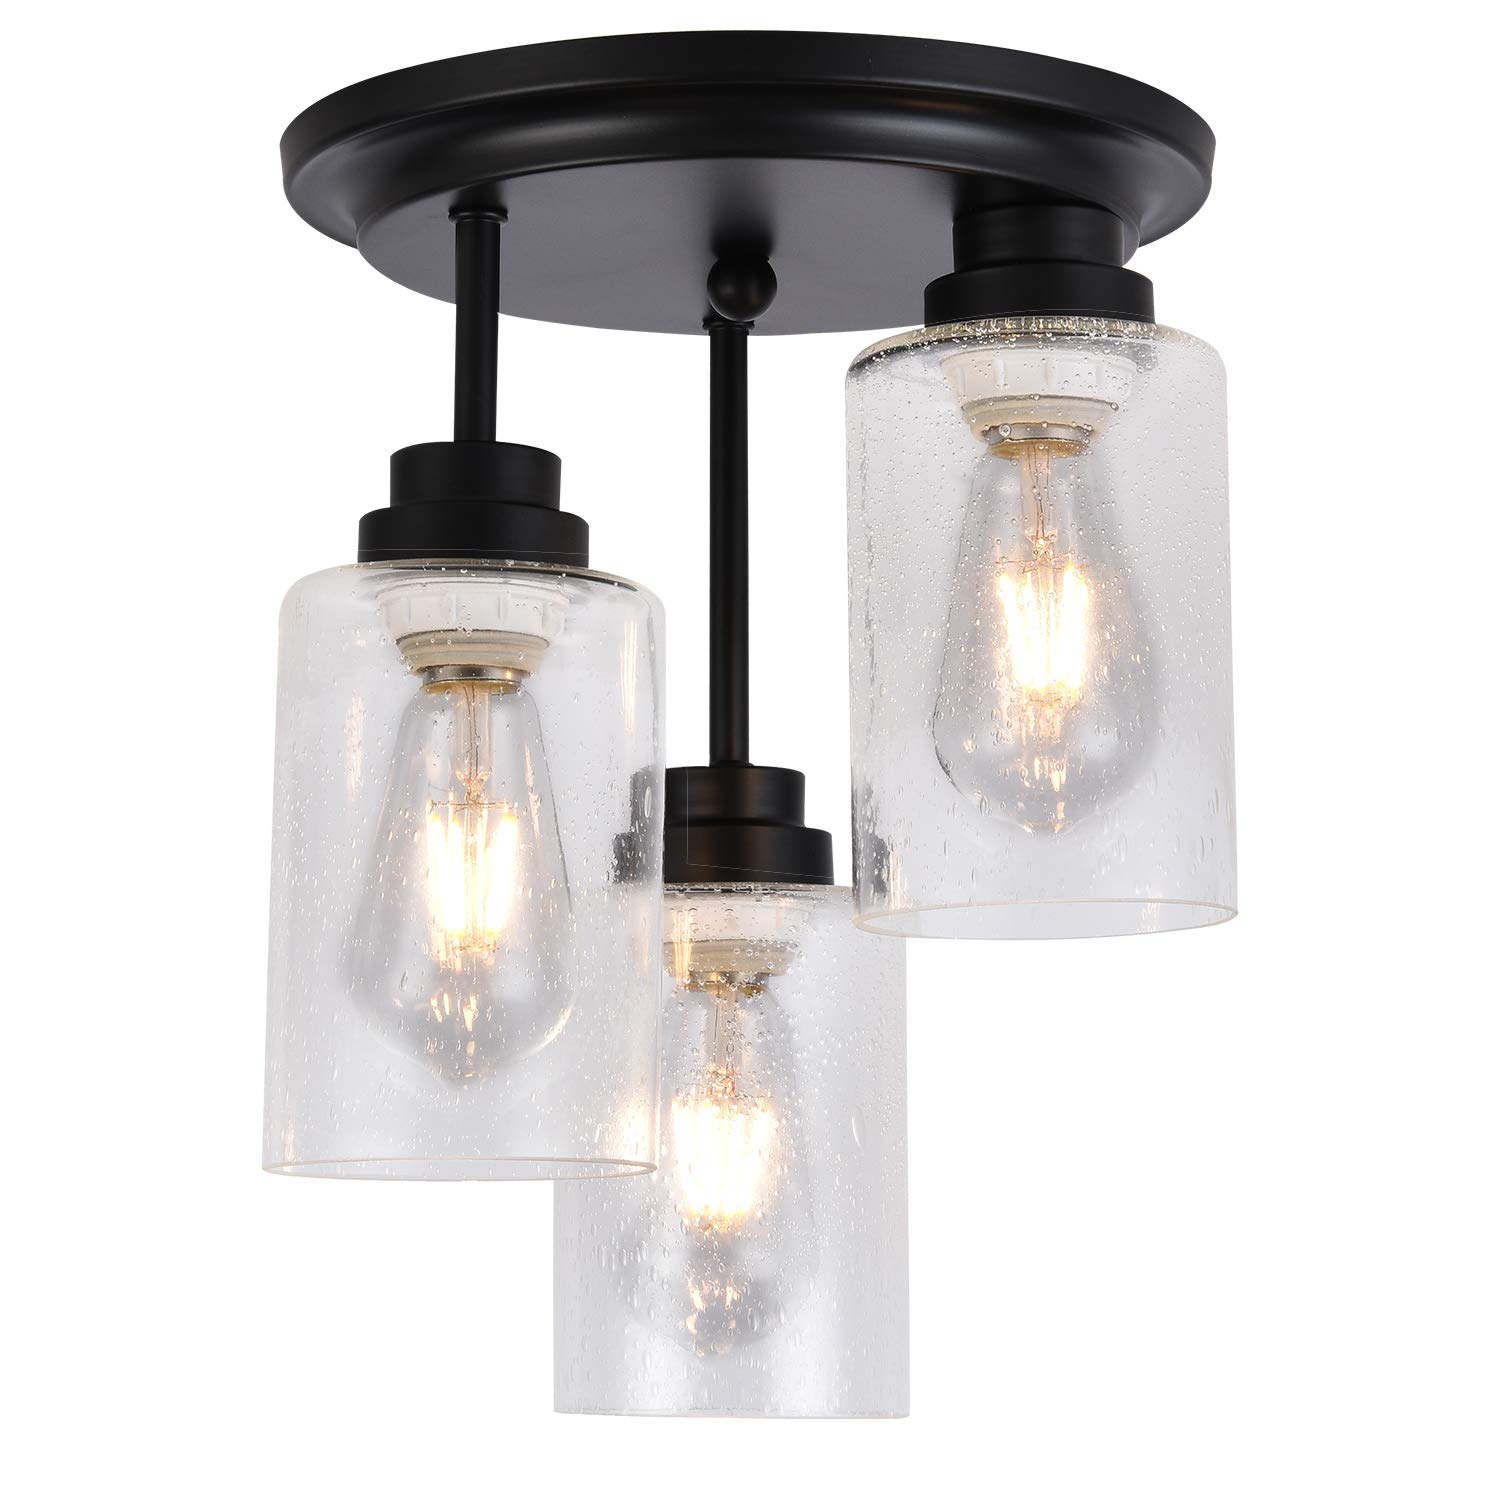 KRASTY 3-Light Black Paint Ceiling Light Semi Flush Mount Light Fixture,Hallway Light Fixtures Ceiling with Seeded Glass Shades for Kitchen Bedrooo...